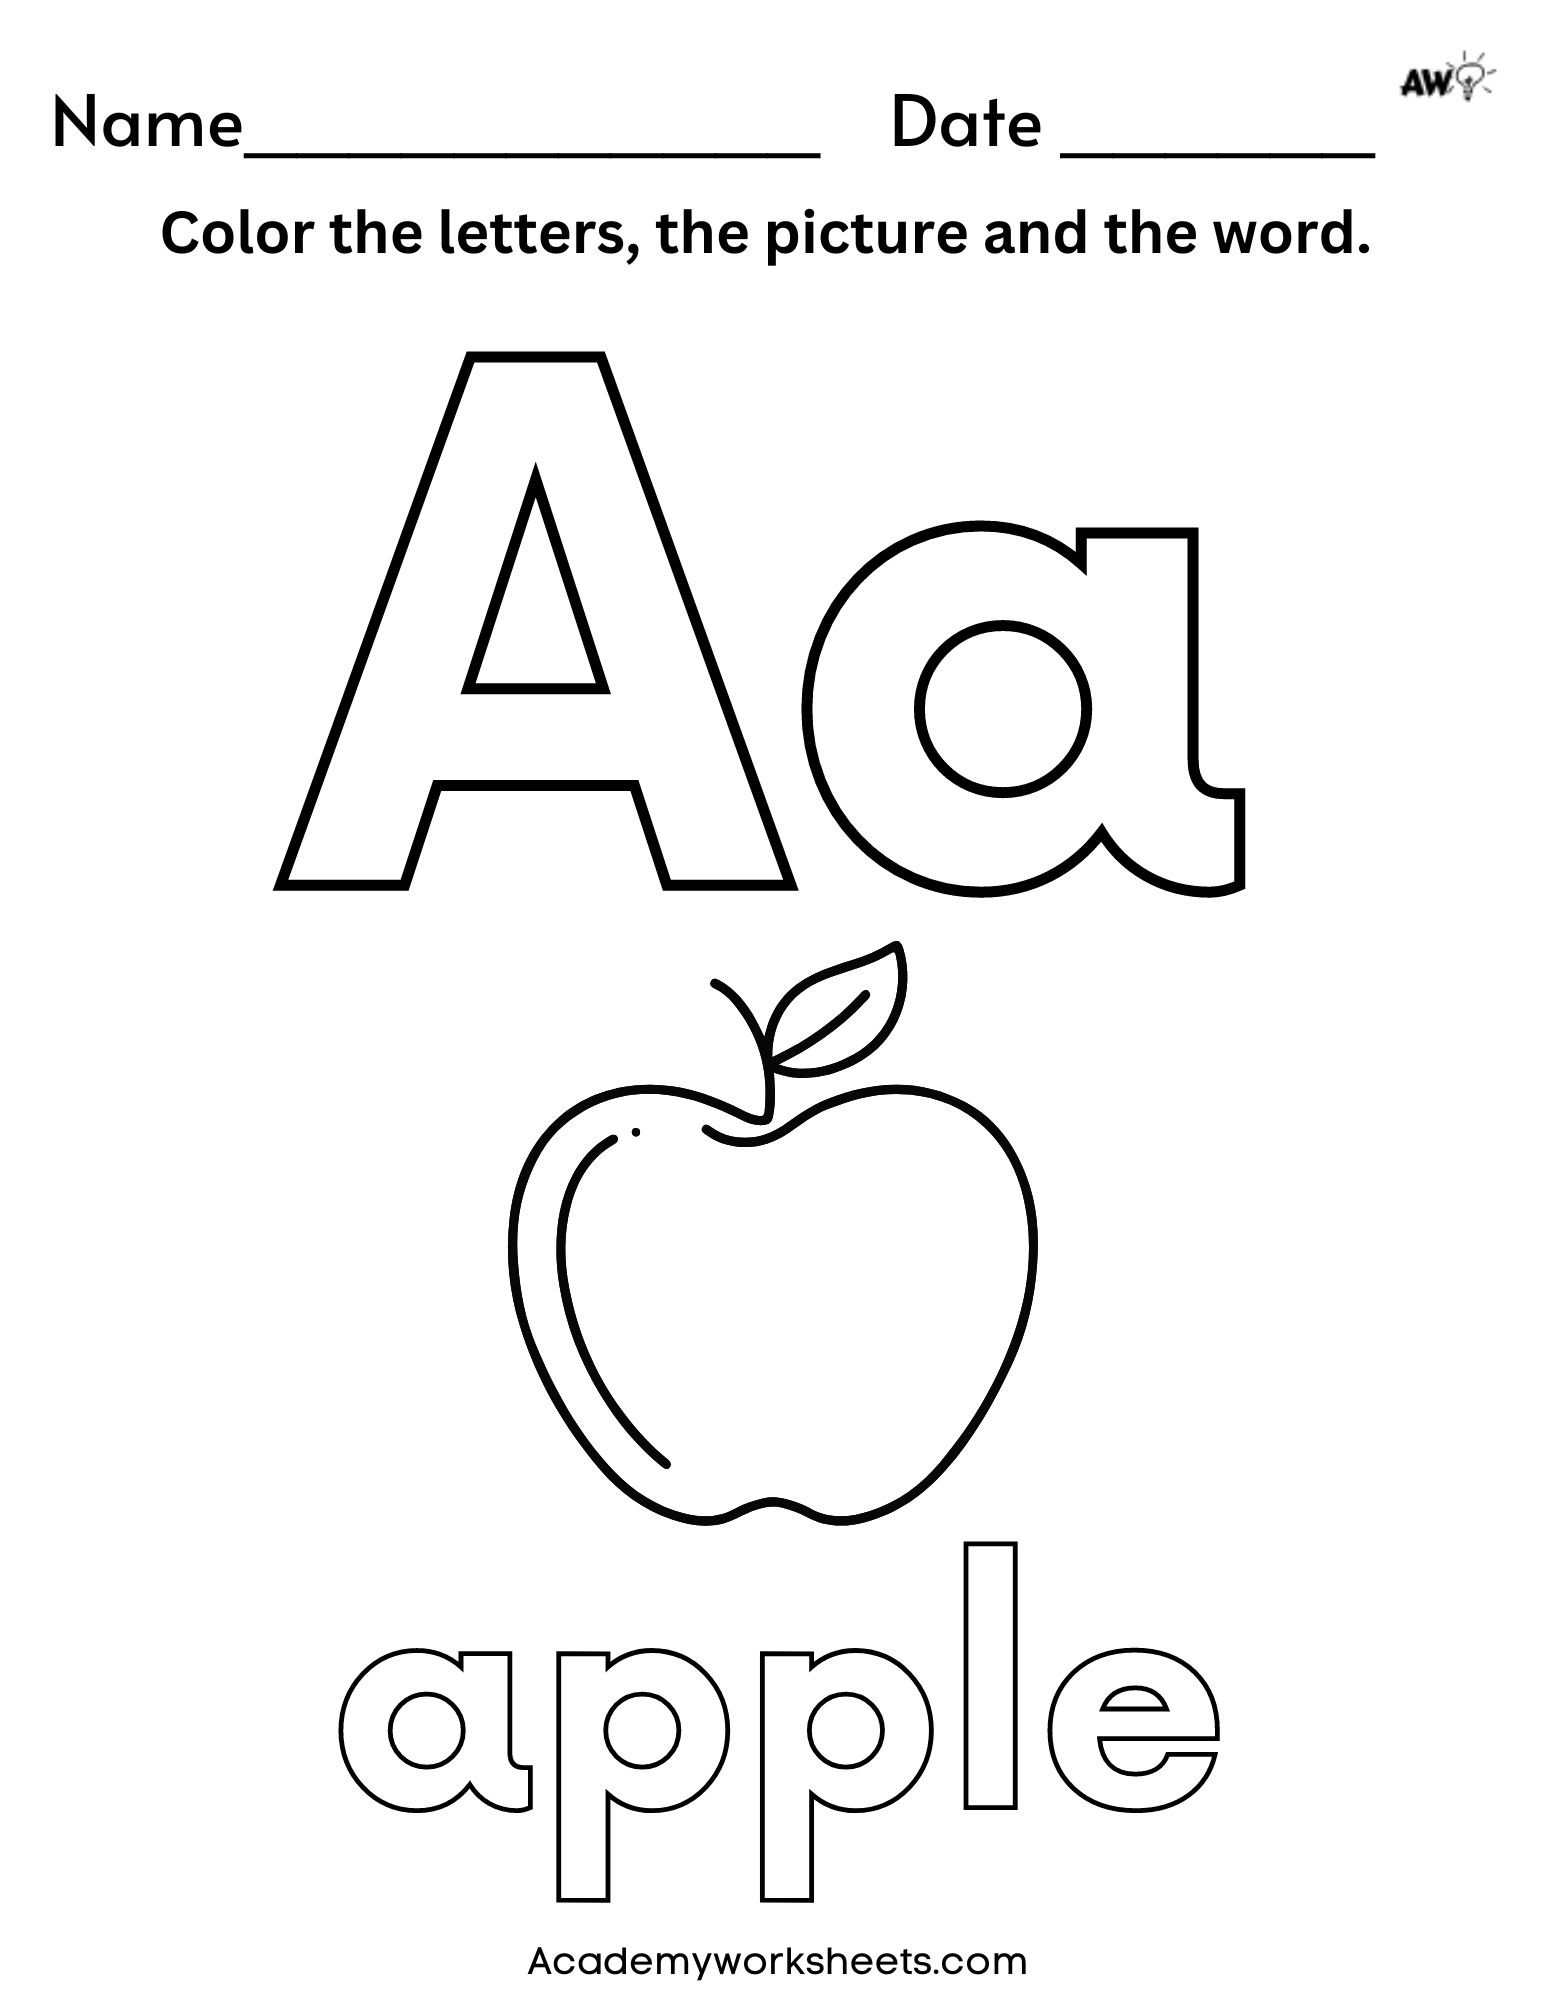 Alphabet Coloring Pages - English Letters - Capital P